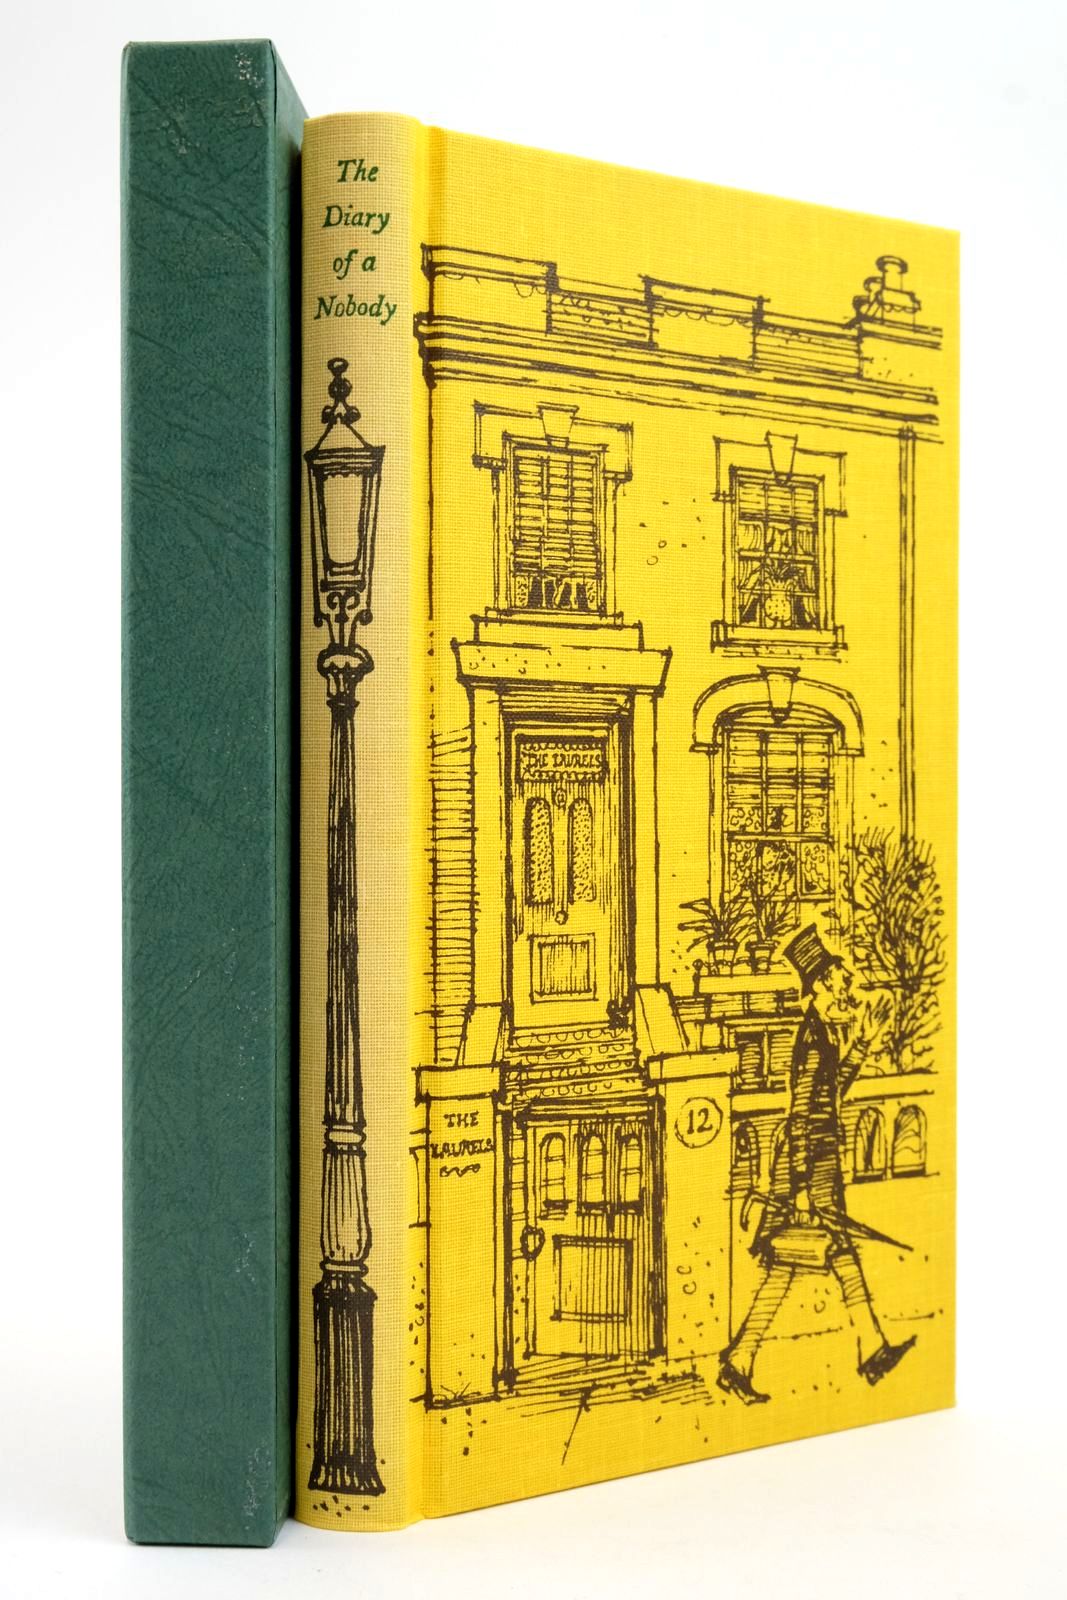 Photo of THE DIARY OF A NOBODY written by Grossmith, George Grossmith, Weedon illustrated by Lawrence, John published by Folio Society (STOCK CODE: 2138422)  for sale by Stella & Rose's Books